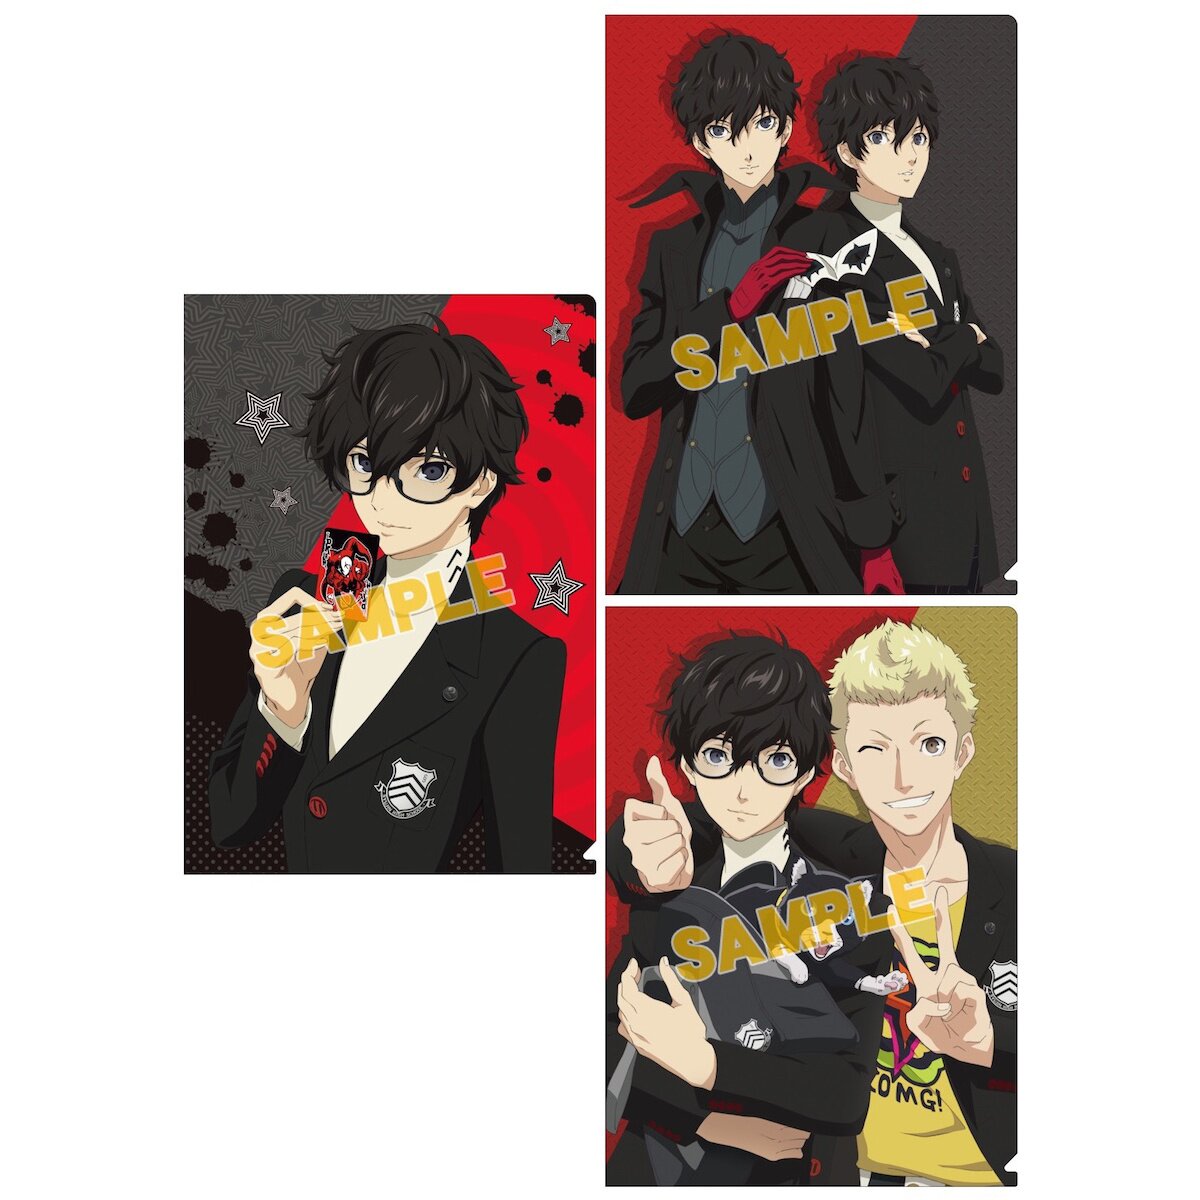 PERSONA 5 the Animation Material Book: PIE International